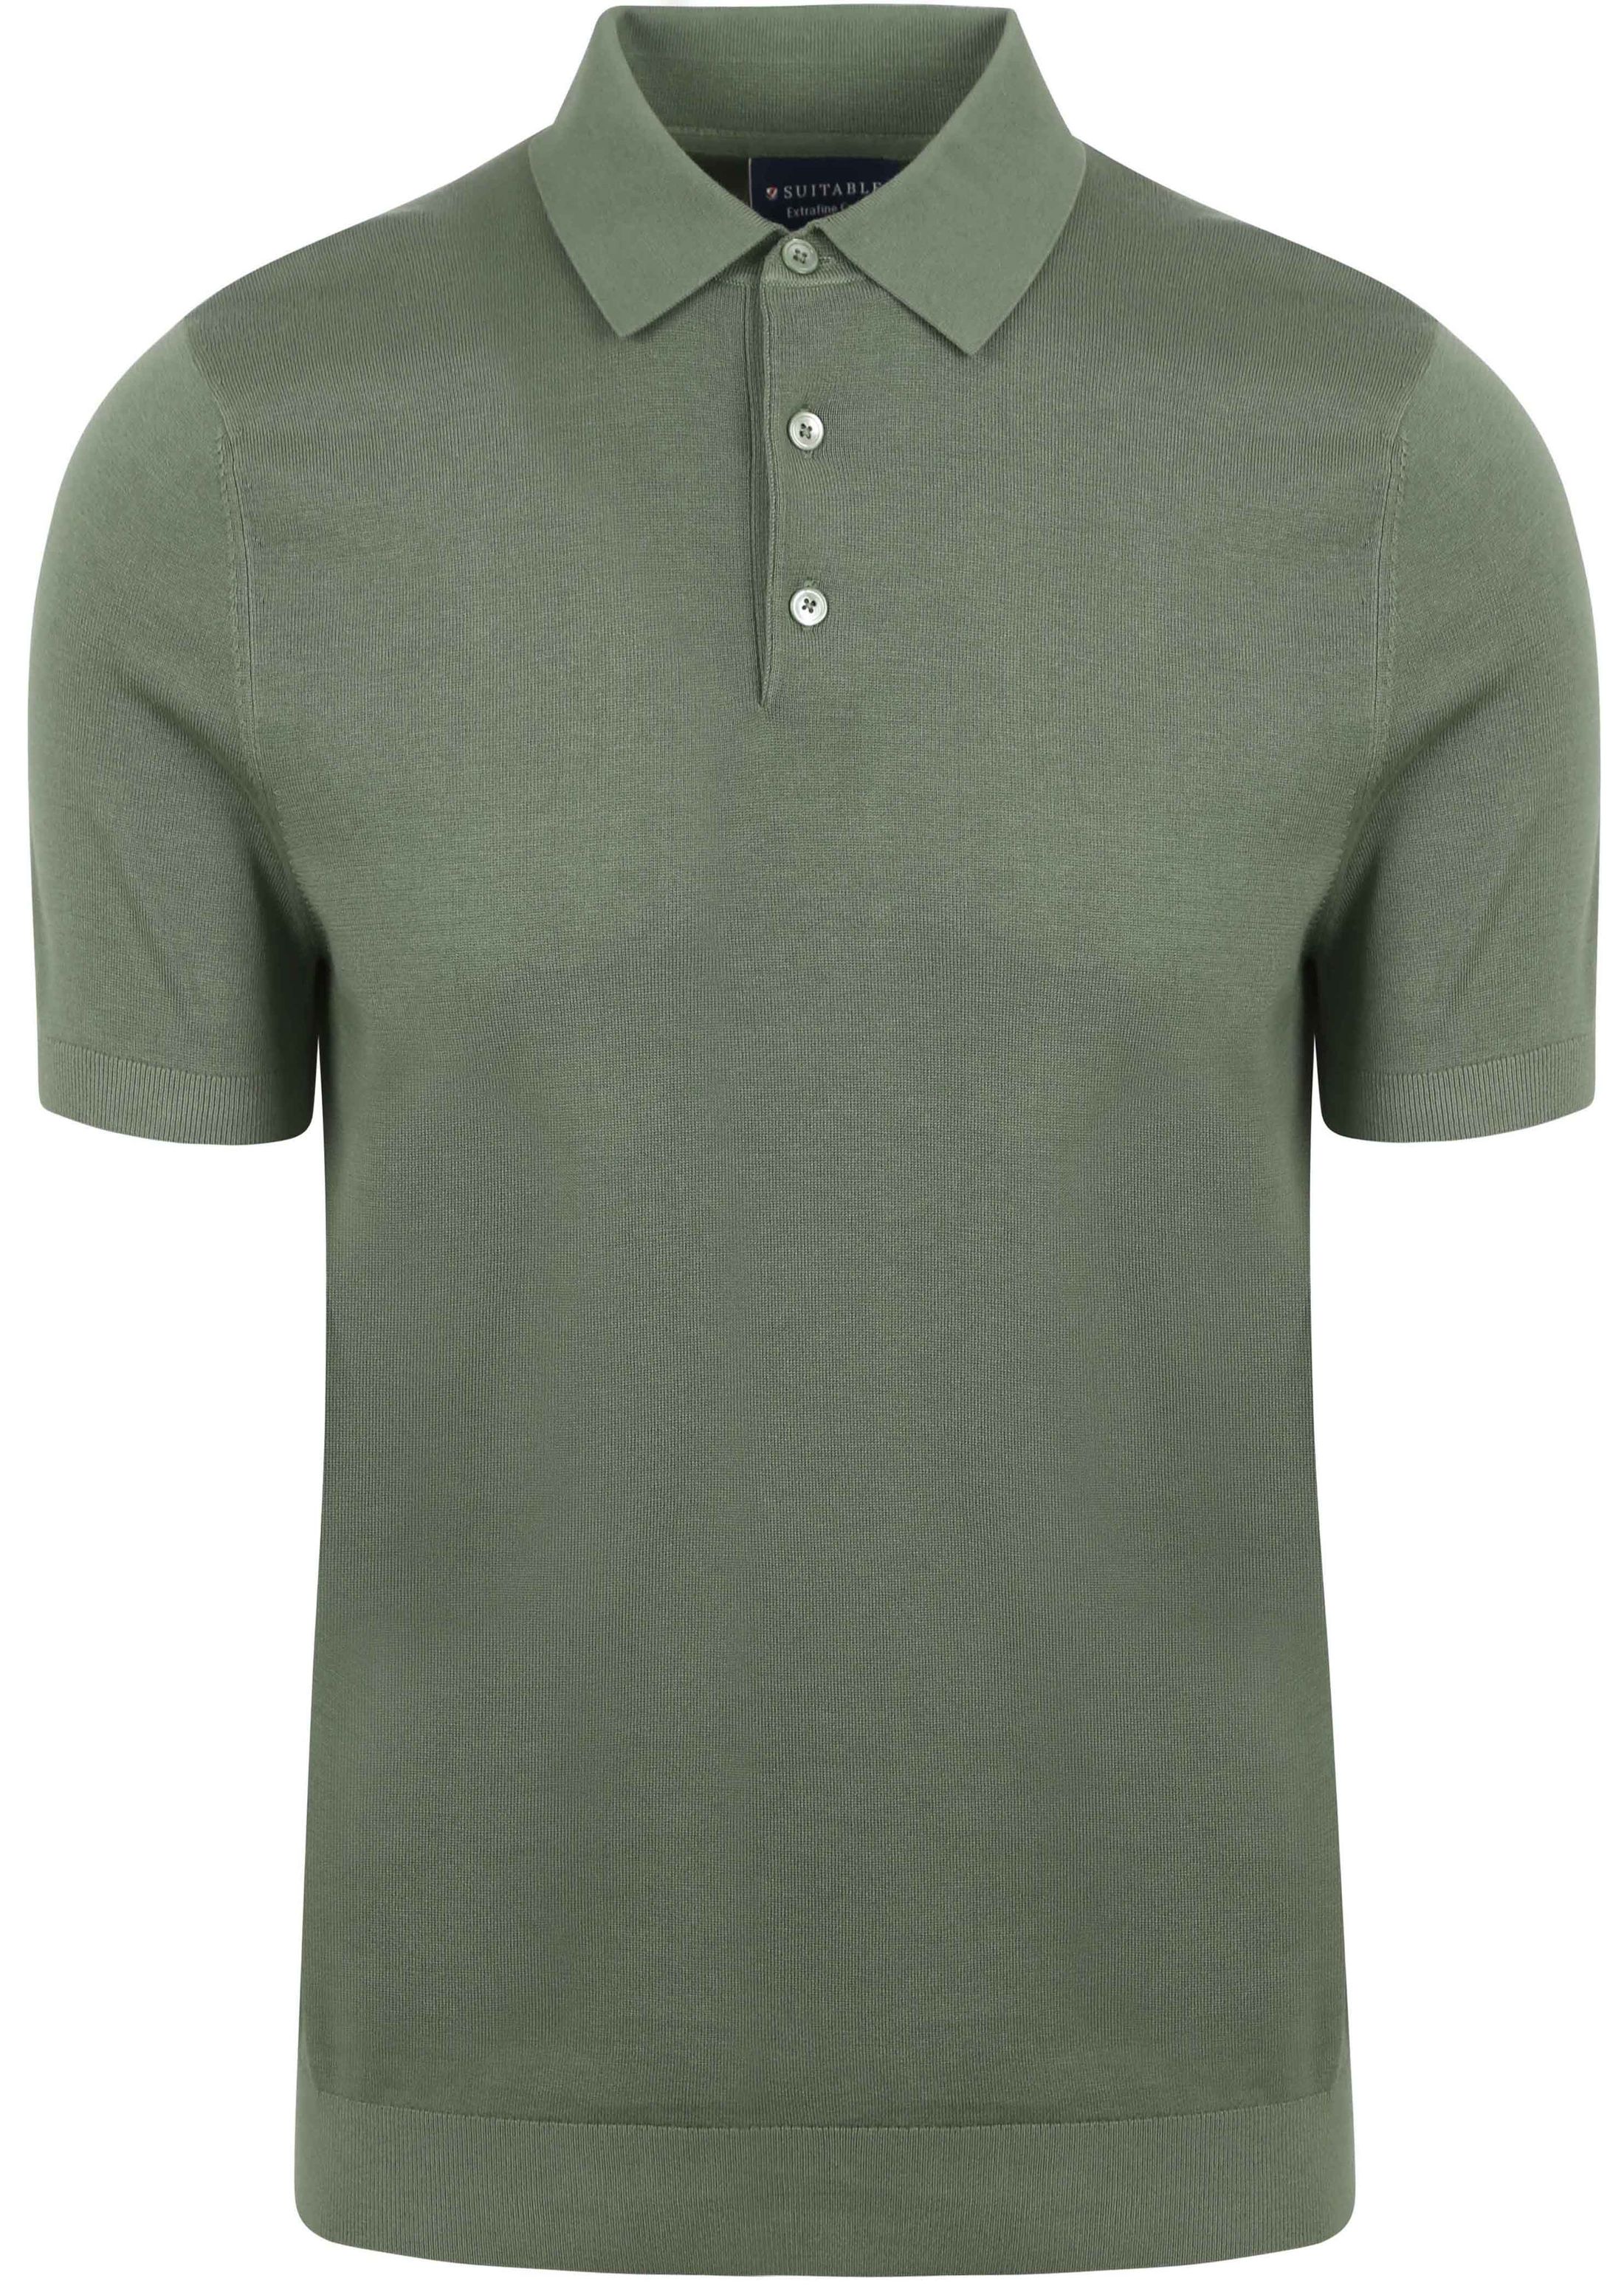 Suitable Knitted Polo Shirt Green PO-BU-CO-24 FCD28100 Soft 